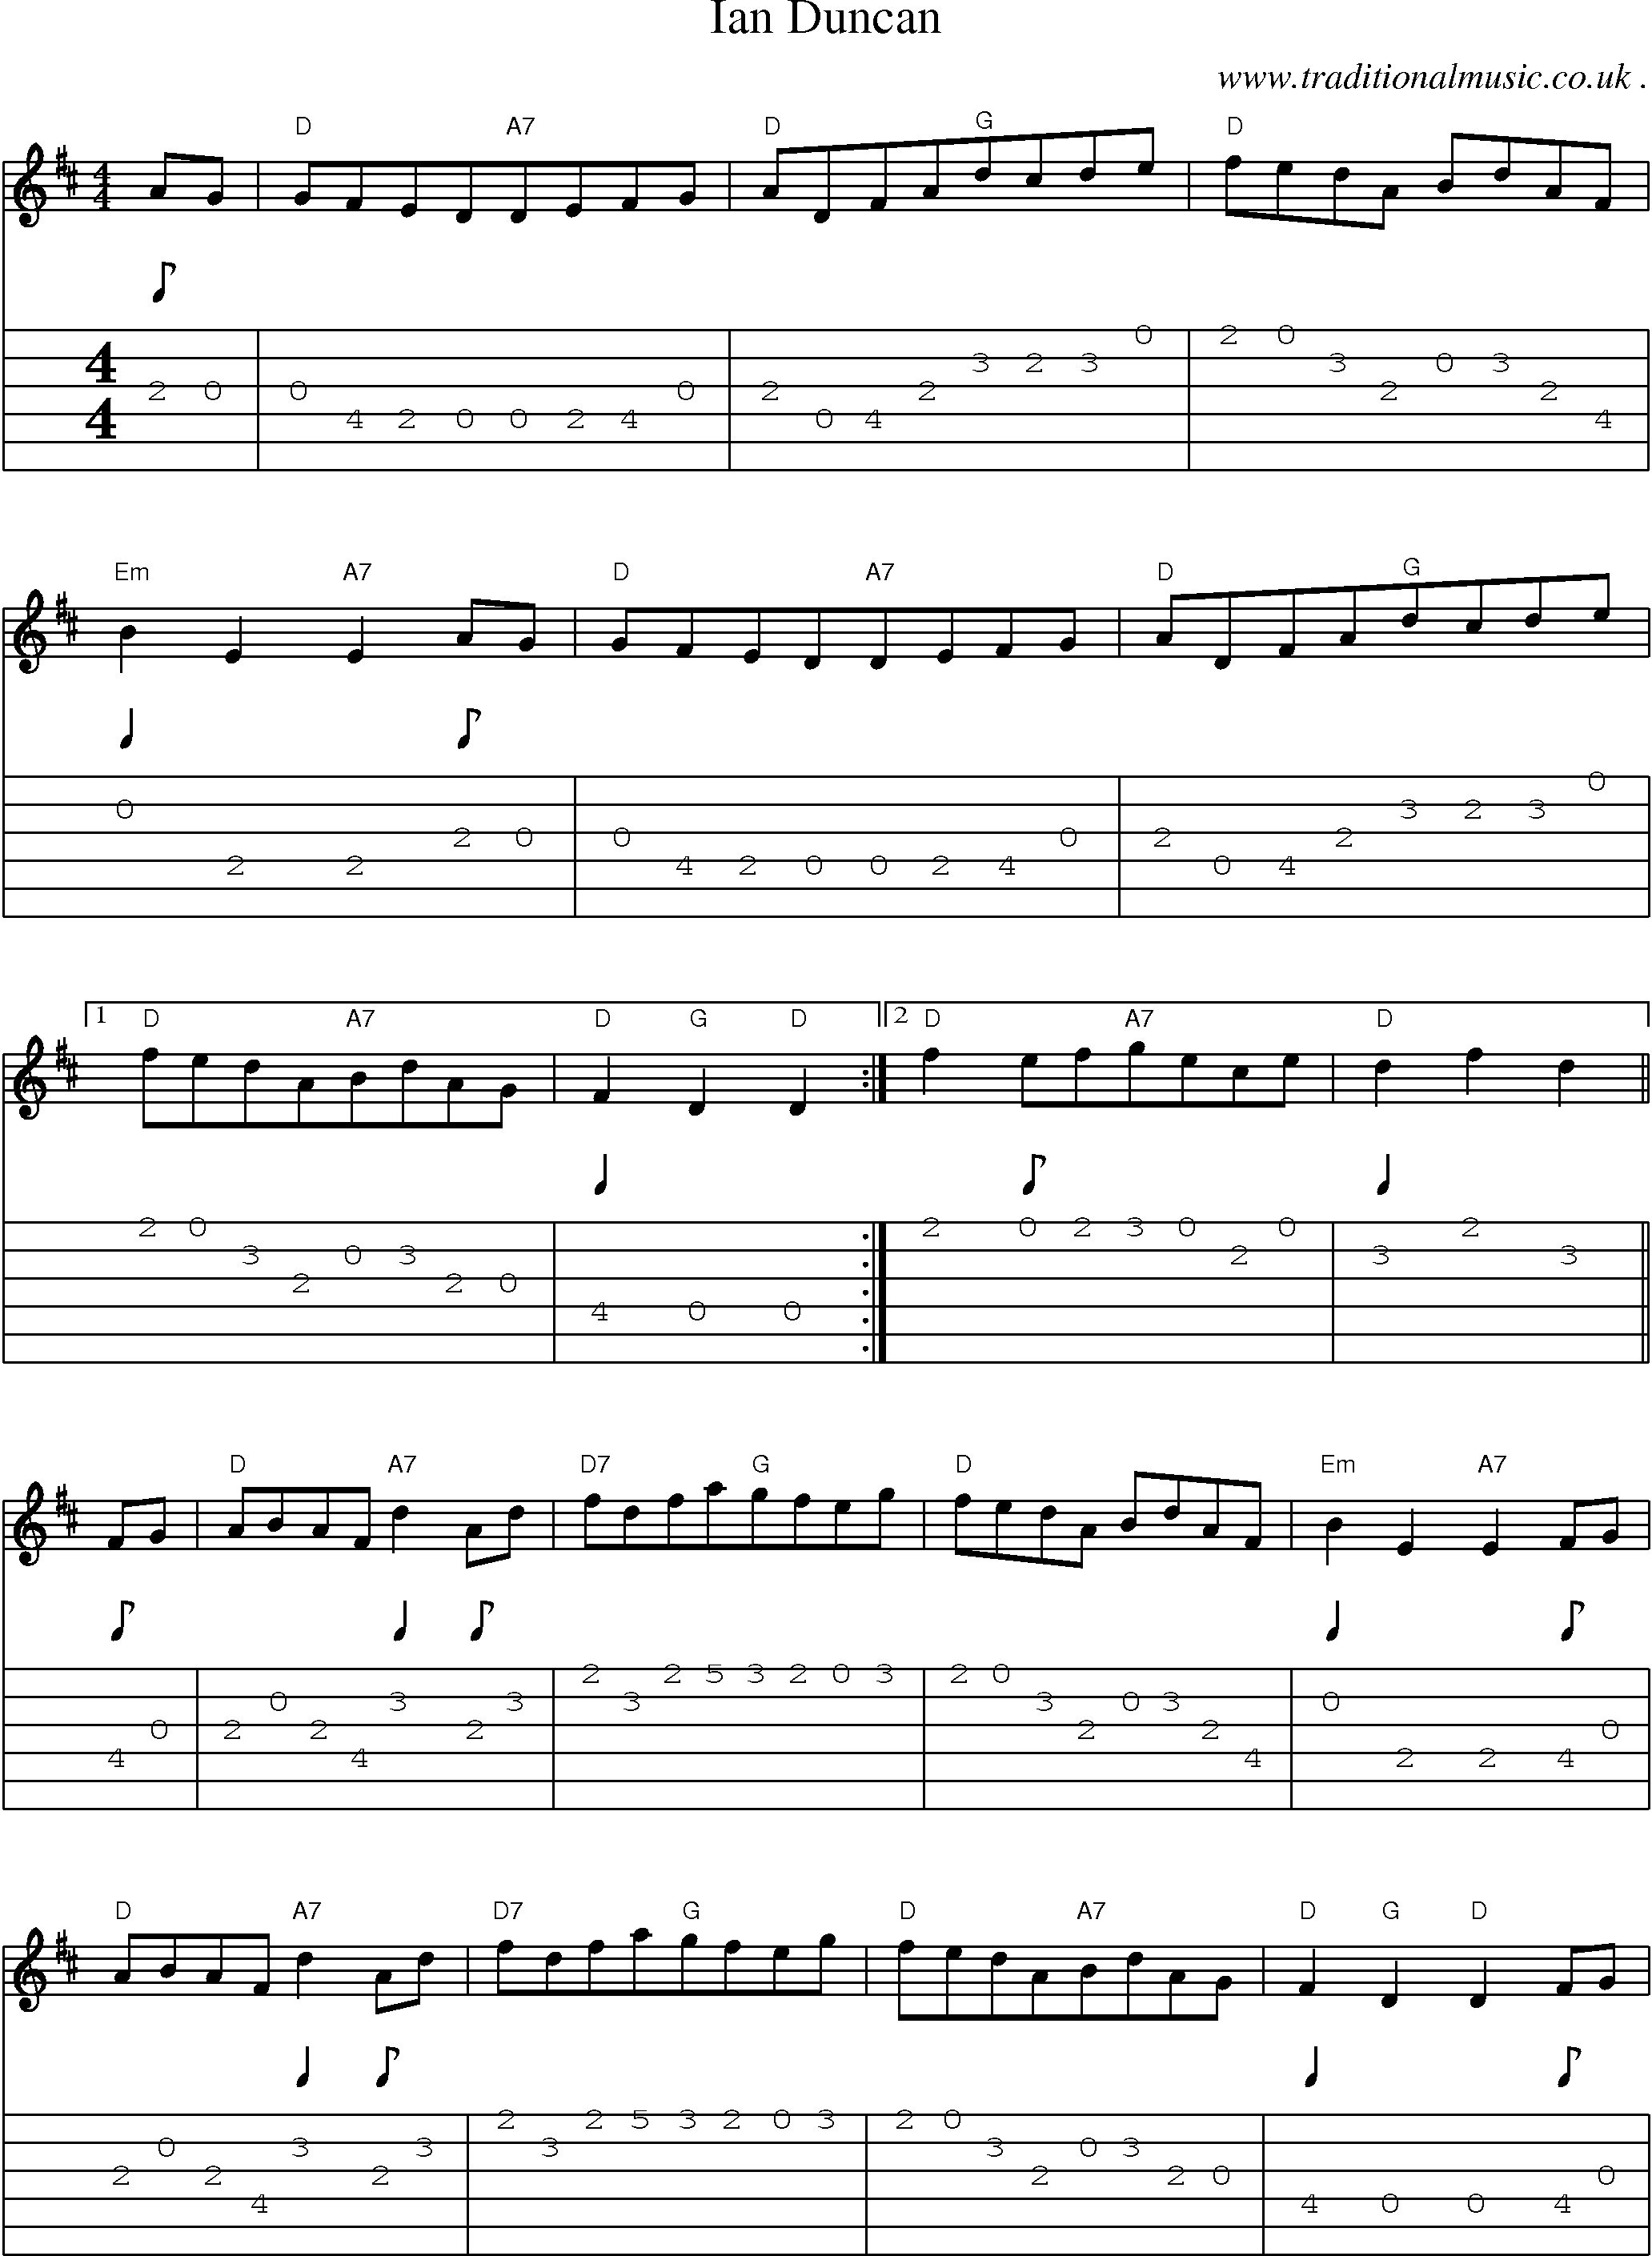 Sheet-Music and Guitar Tabs for Ian Duncan